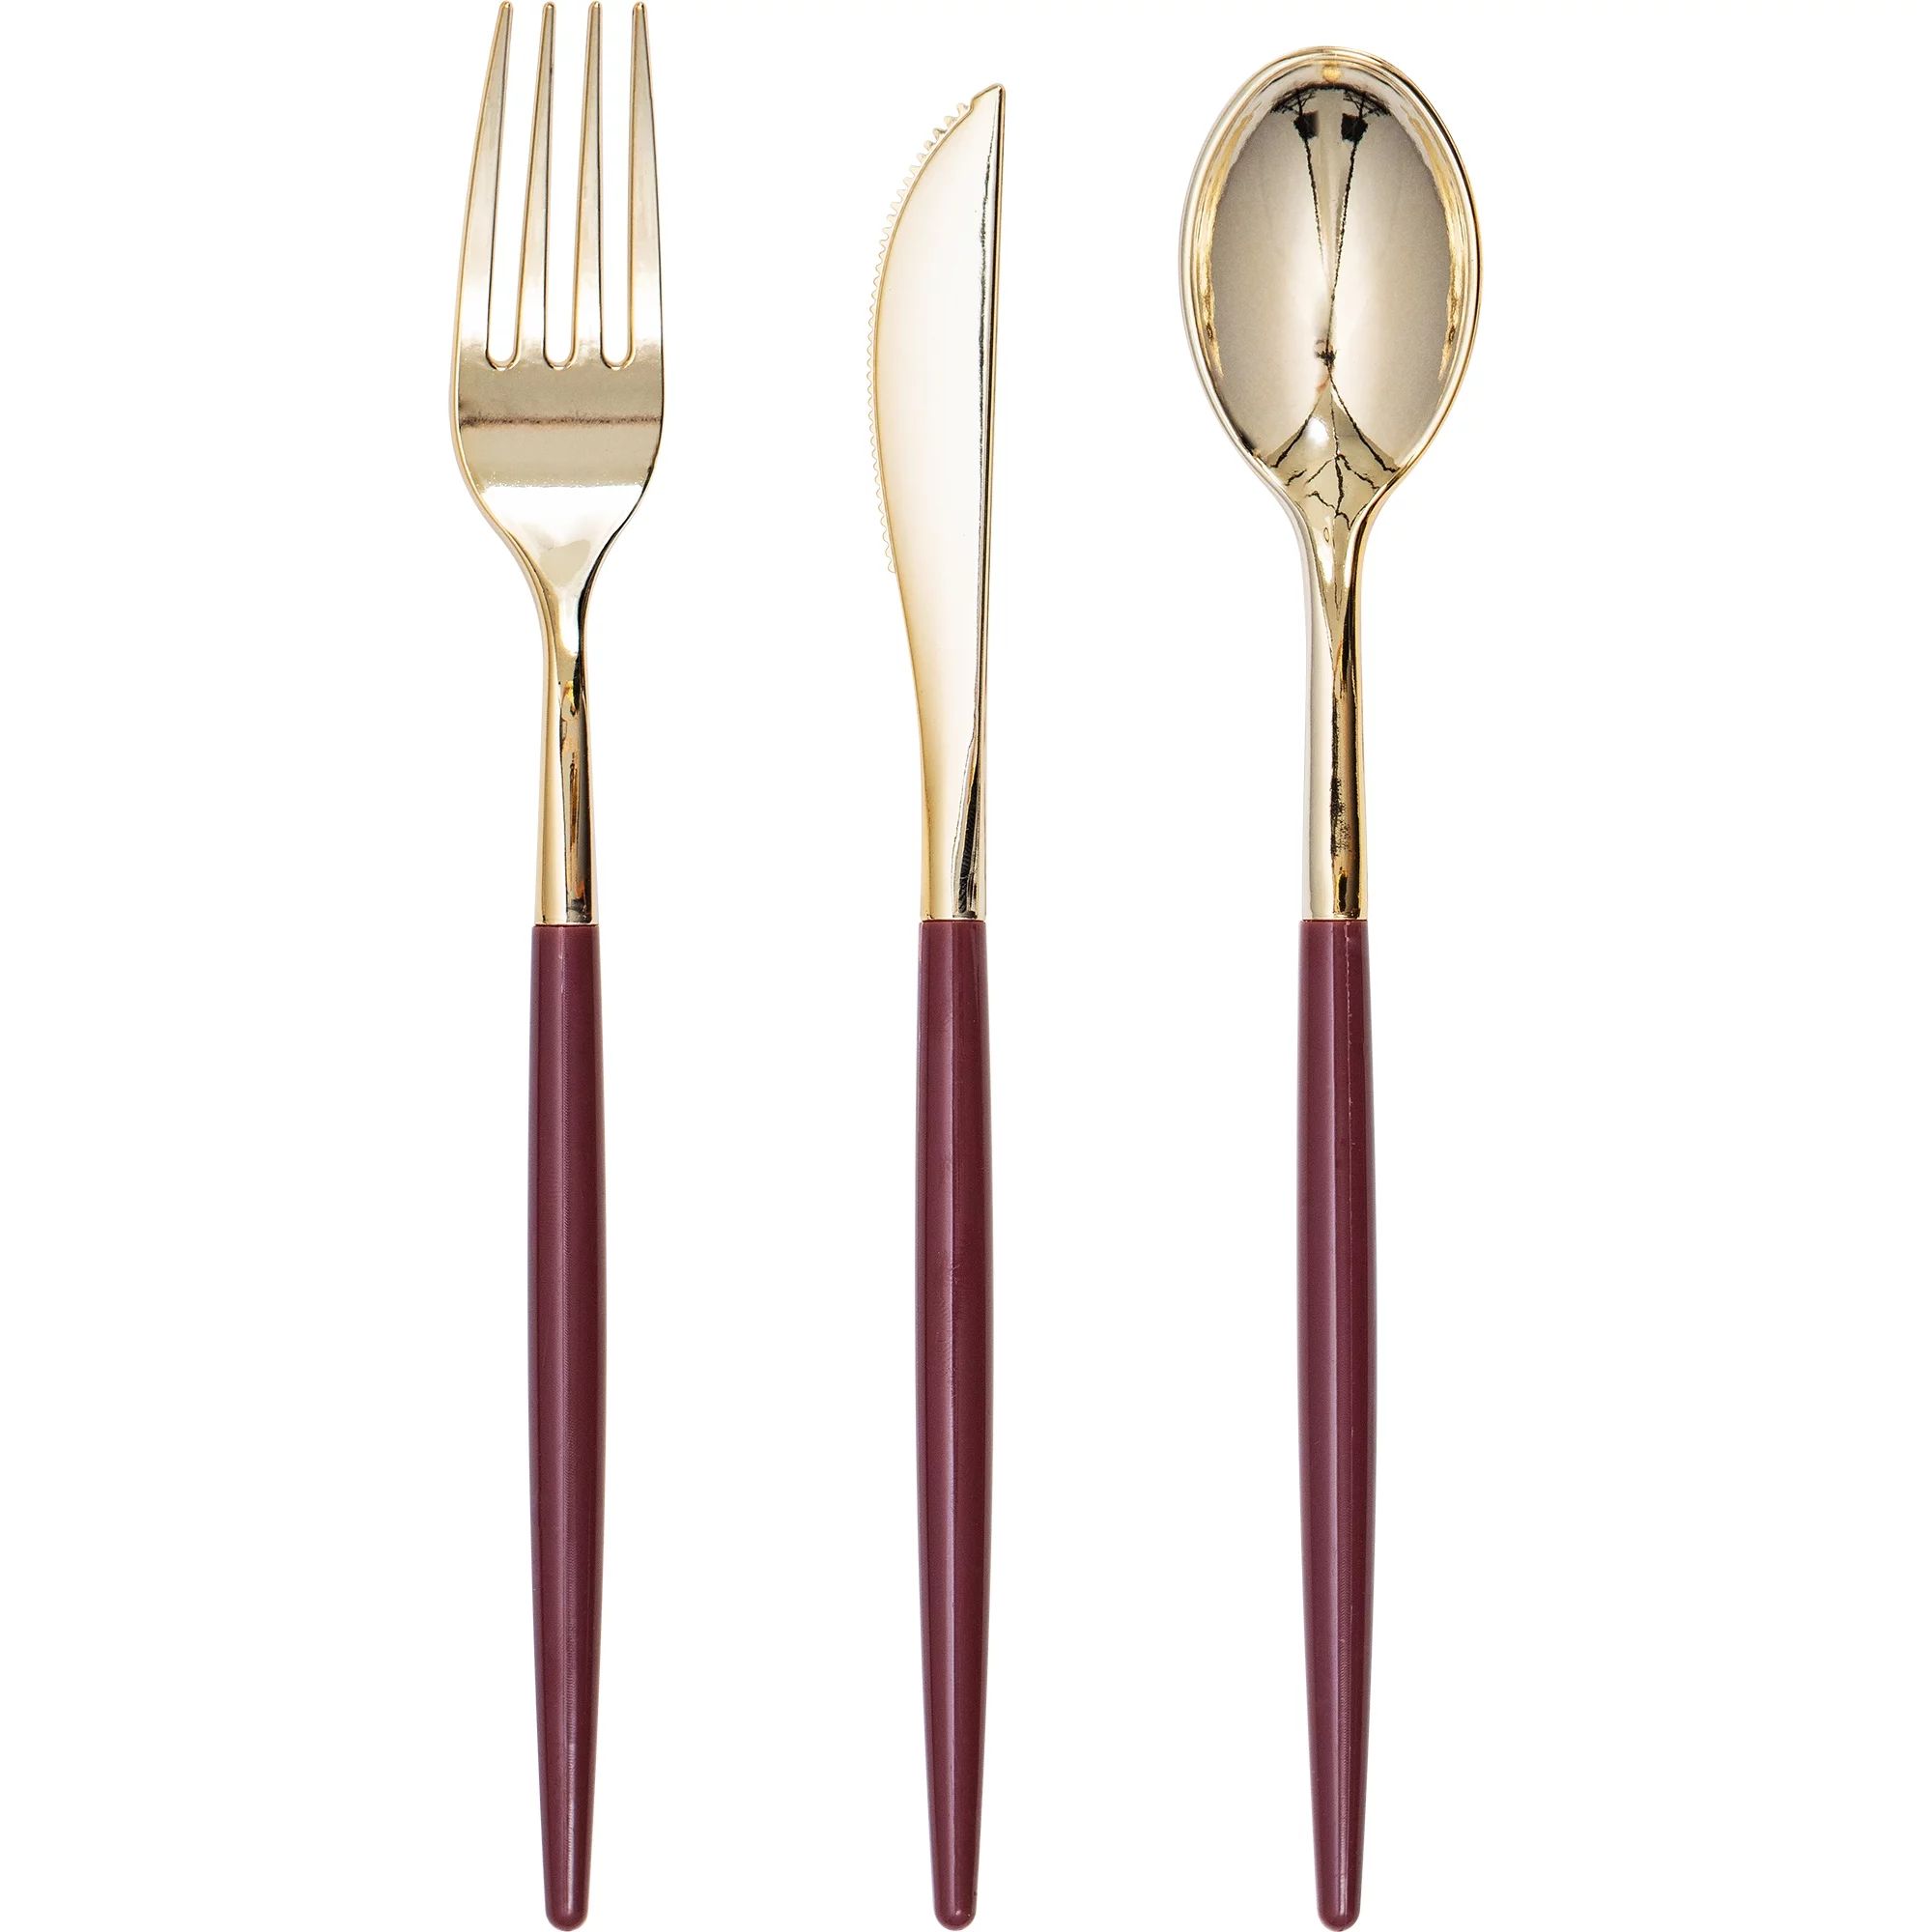 18-Piece Cutlery Flatware Set, Maroon with Gold Top, Service for 6, by Holiday Time | Walmart (US)